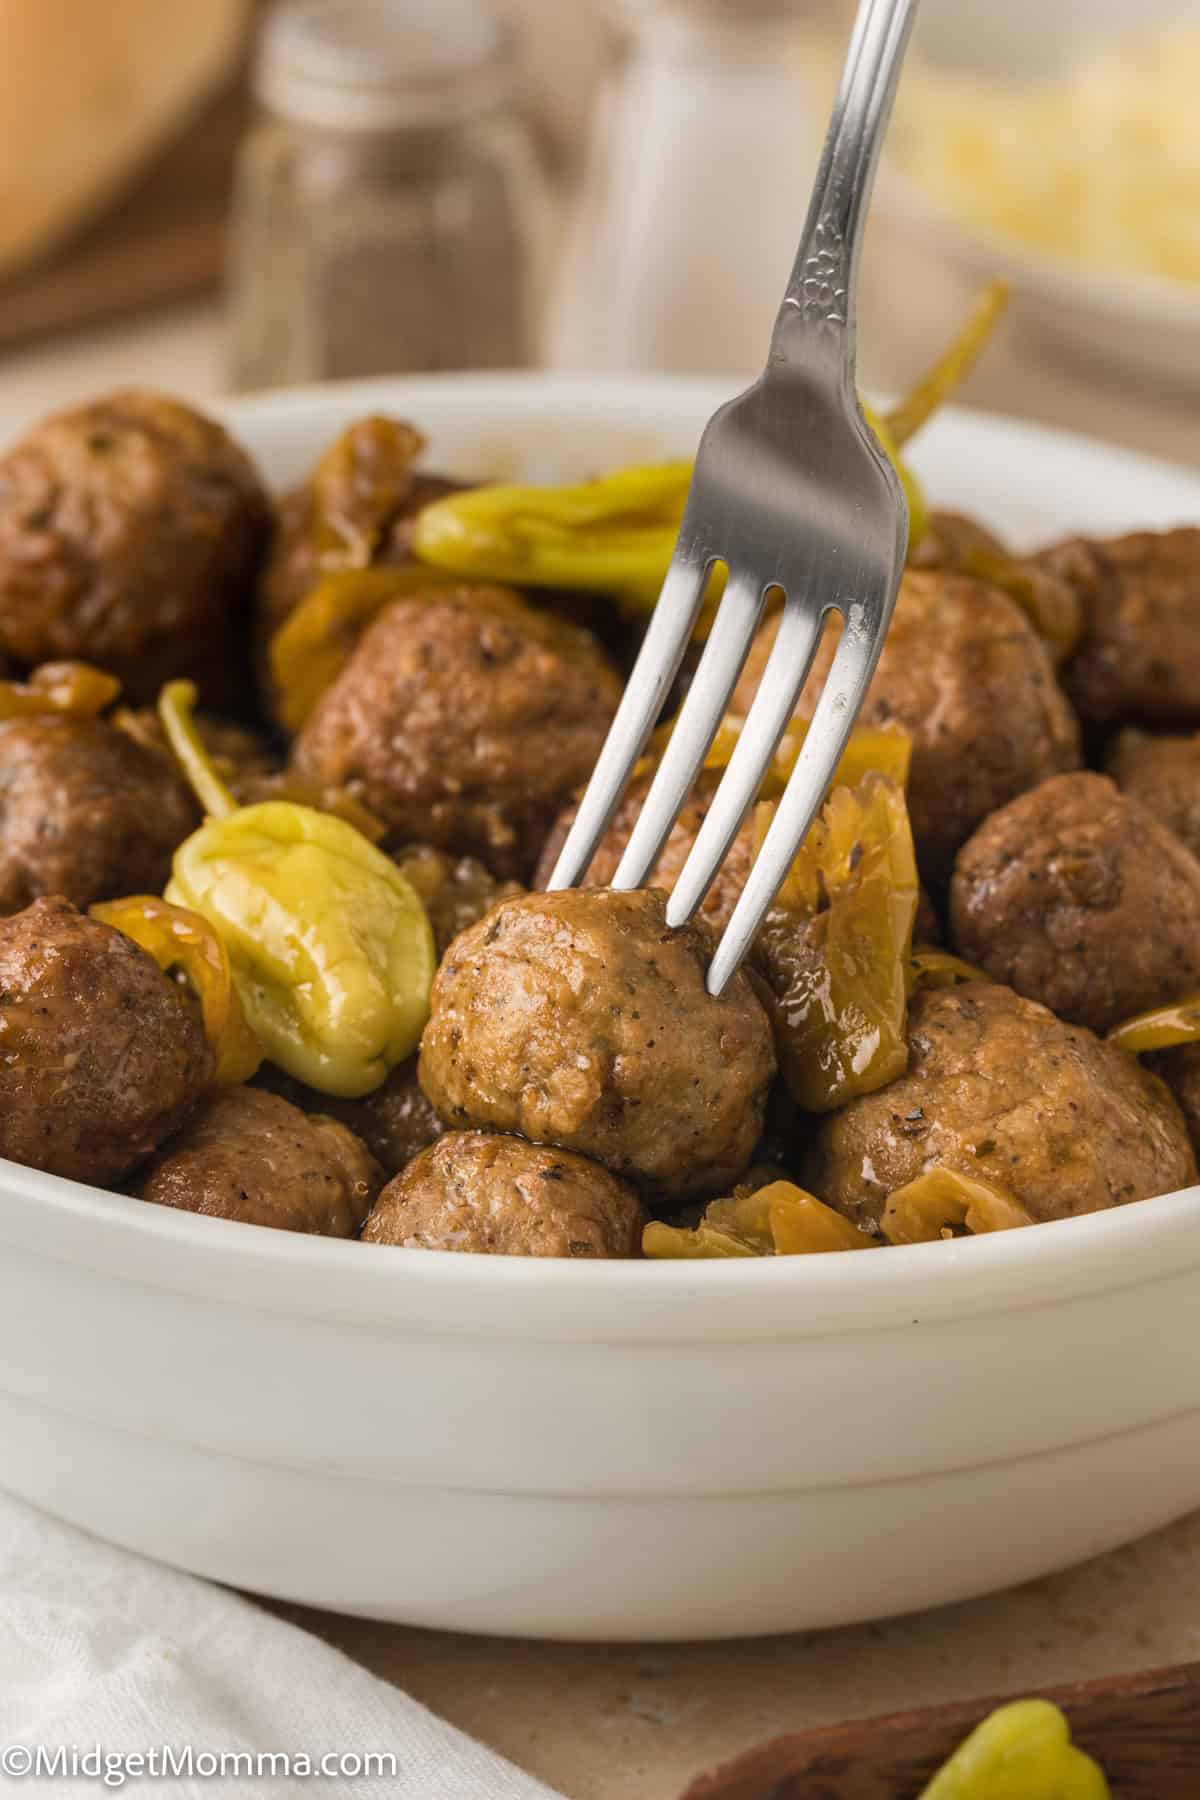 A bowl of cooked meatballs and sliced peppers. A fork is piercing one of the meatballs.